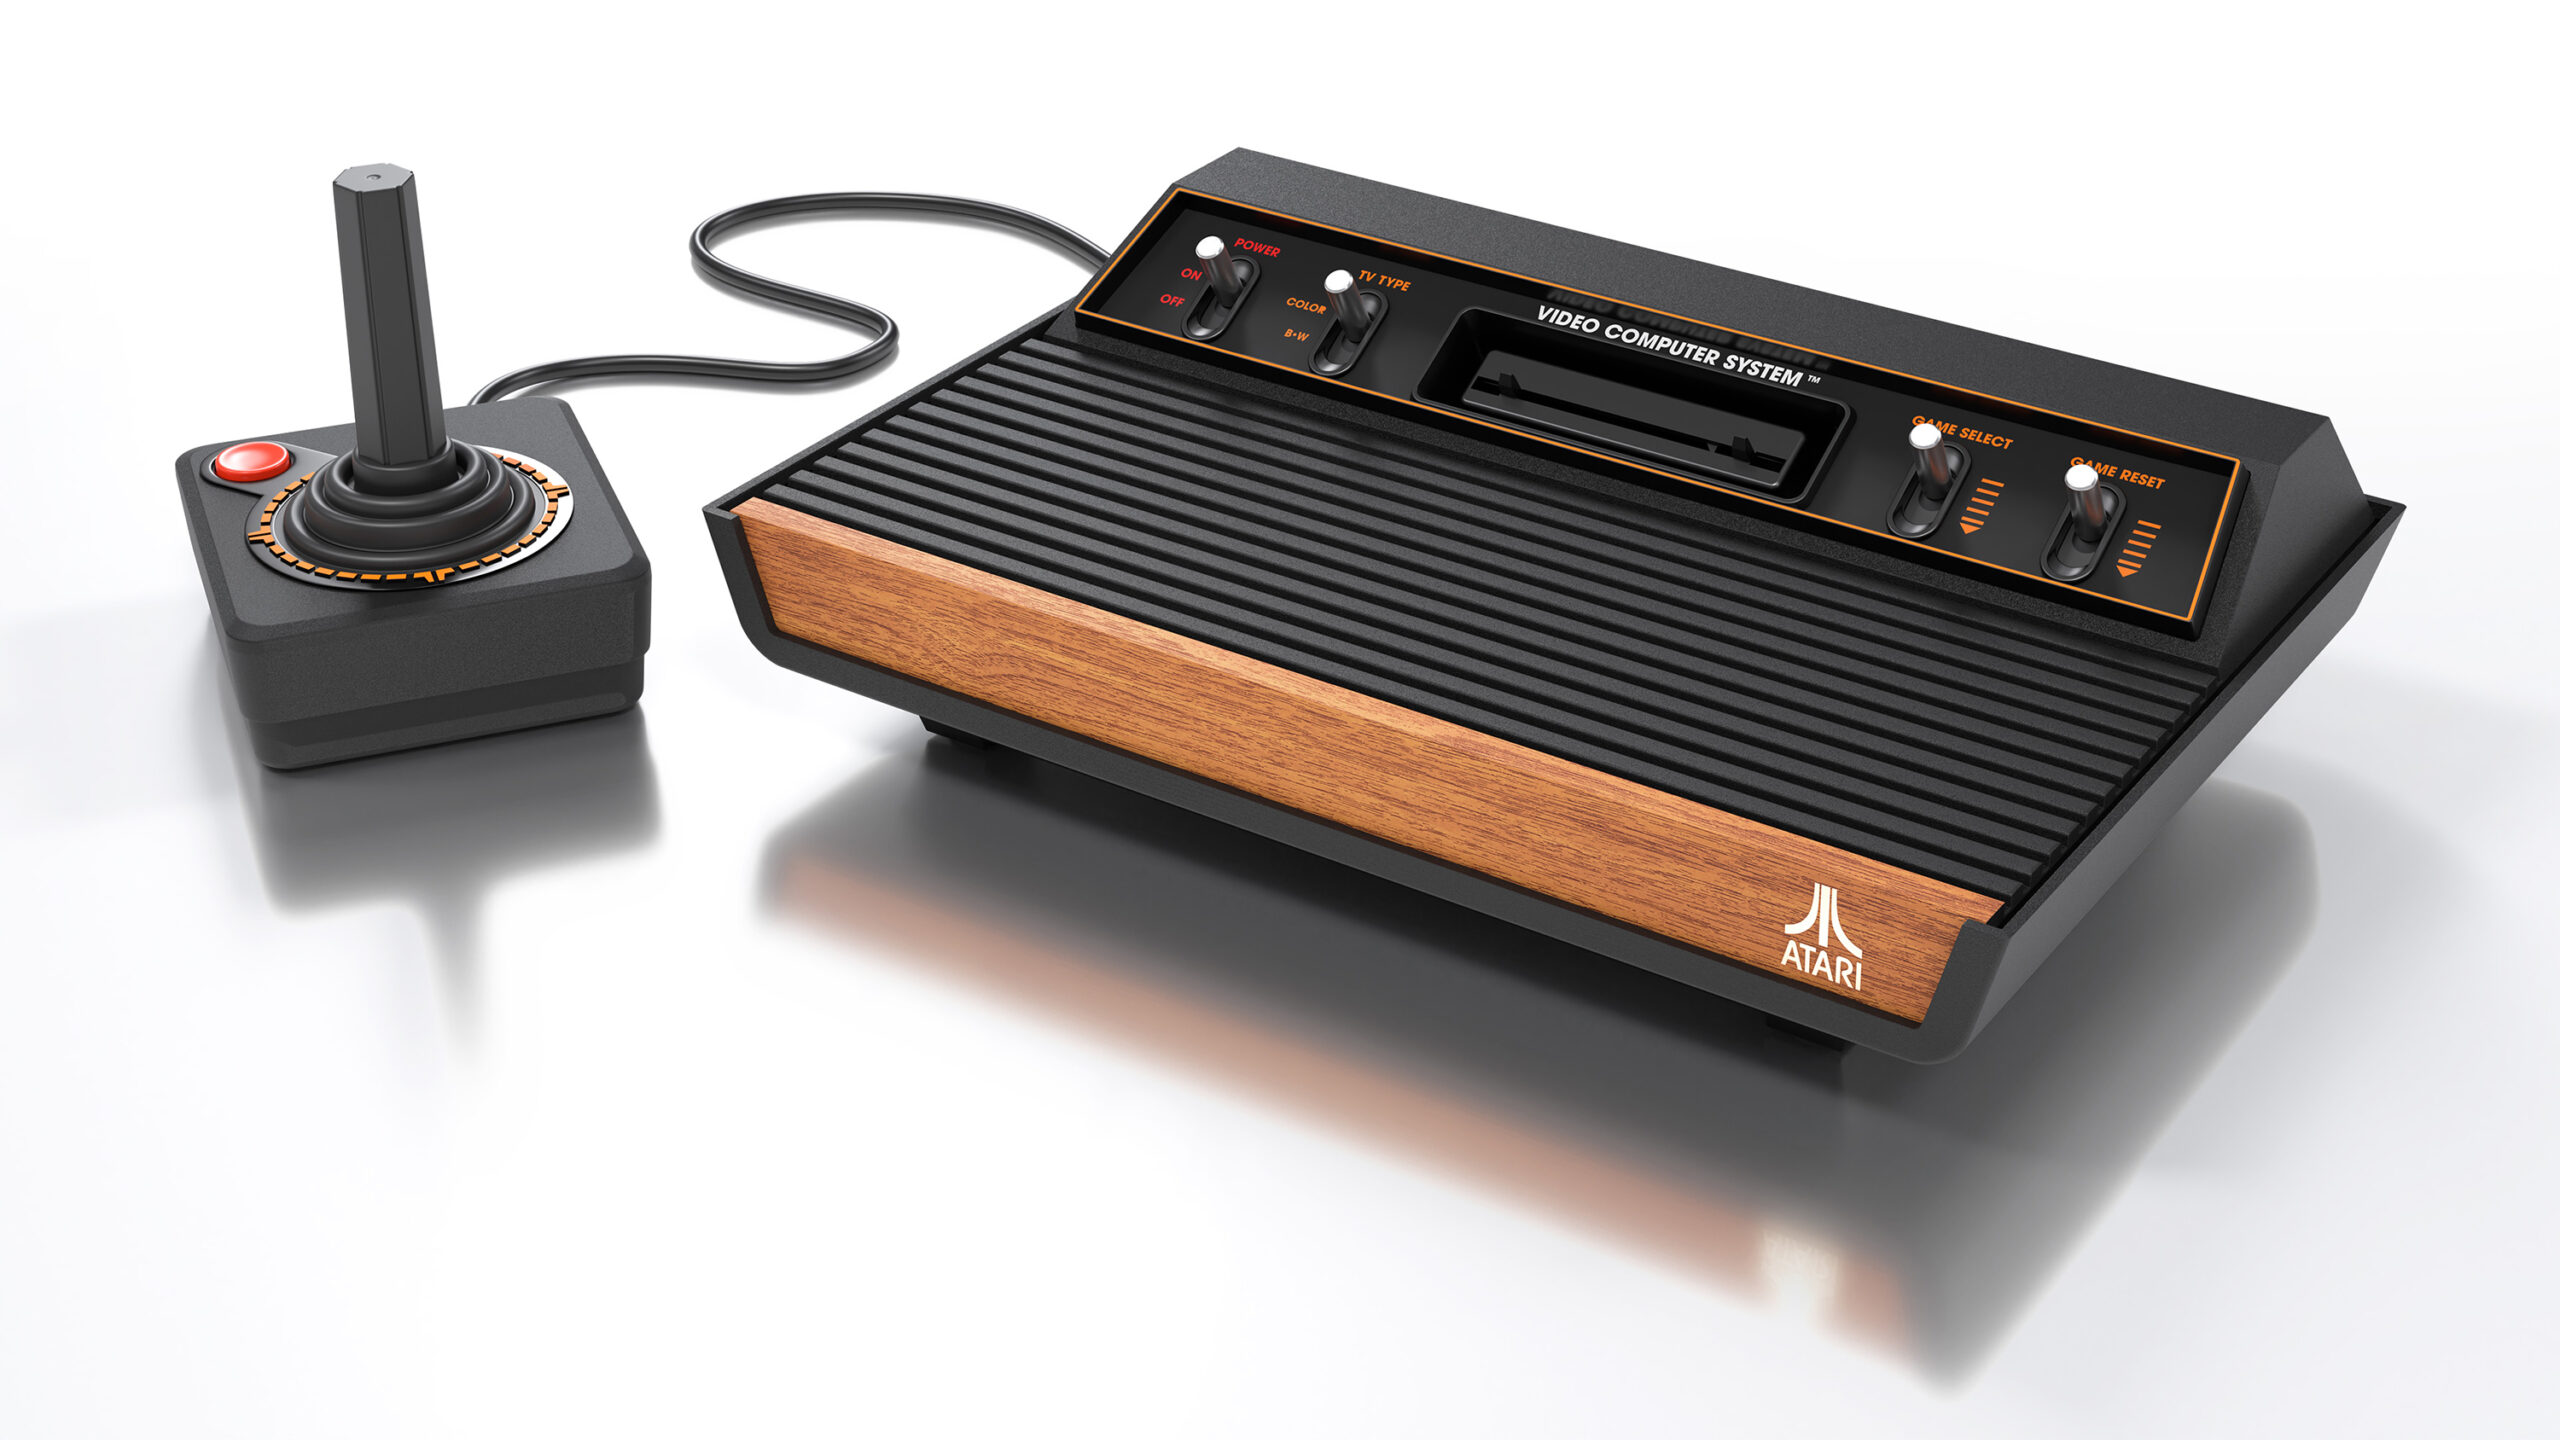 image of the Atari 2600+ video game console, with attached joystick controller. It is a re-creation of the version of the original Atari 2600 console released in 1980, with four metal switches and wood panel.